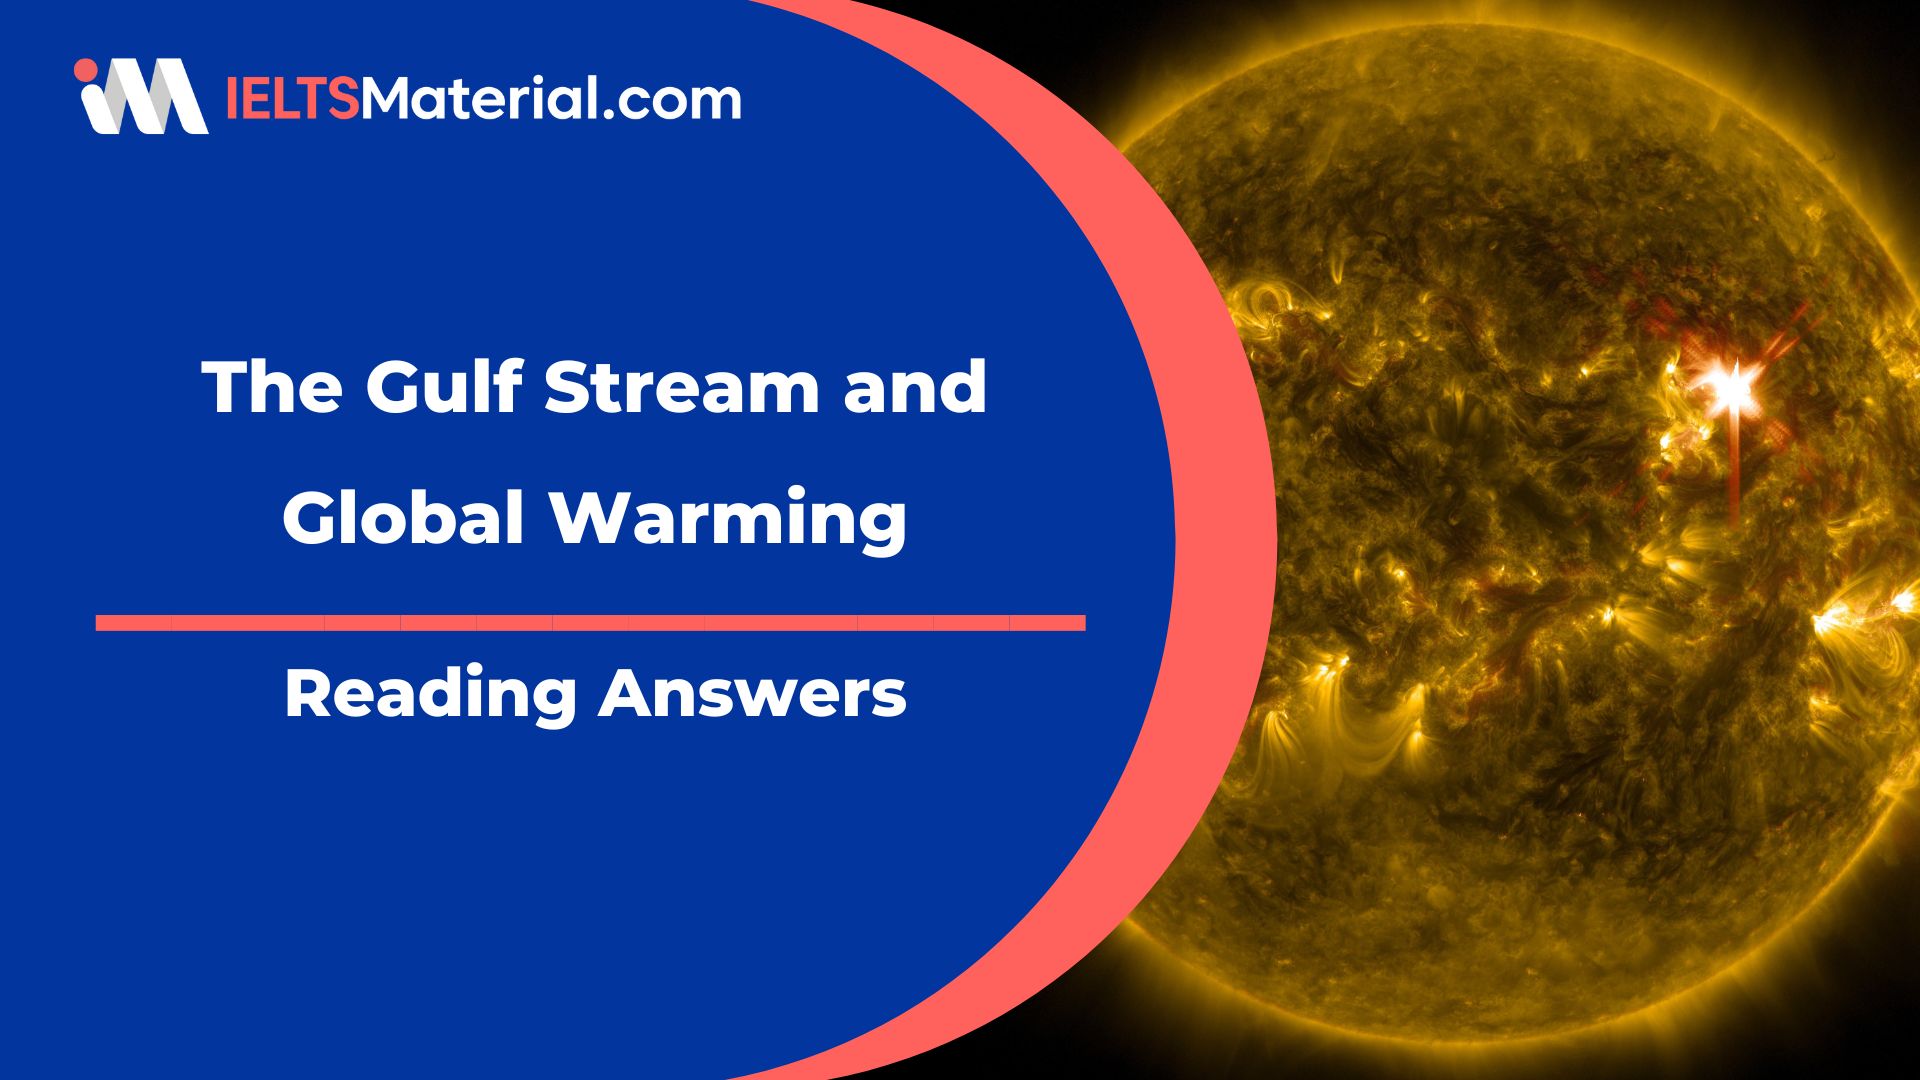 The Gulf Stream and Global Warming Reading Answers